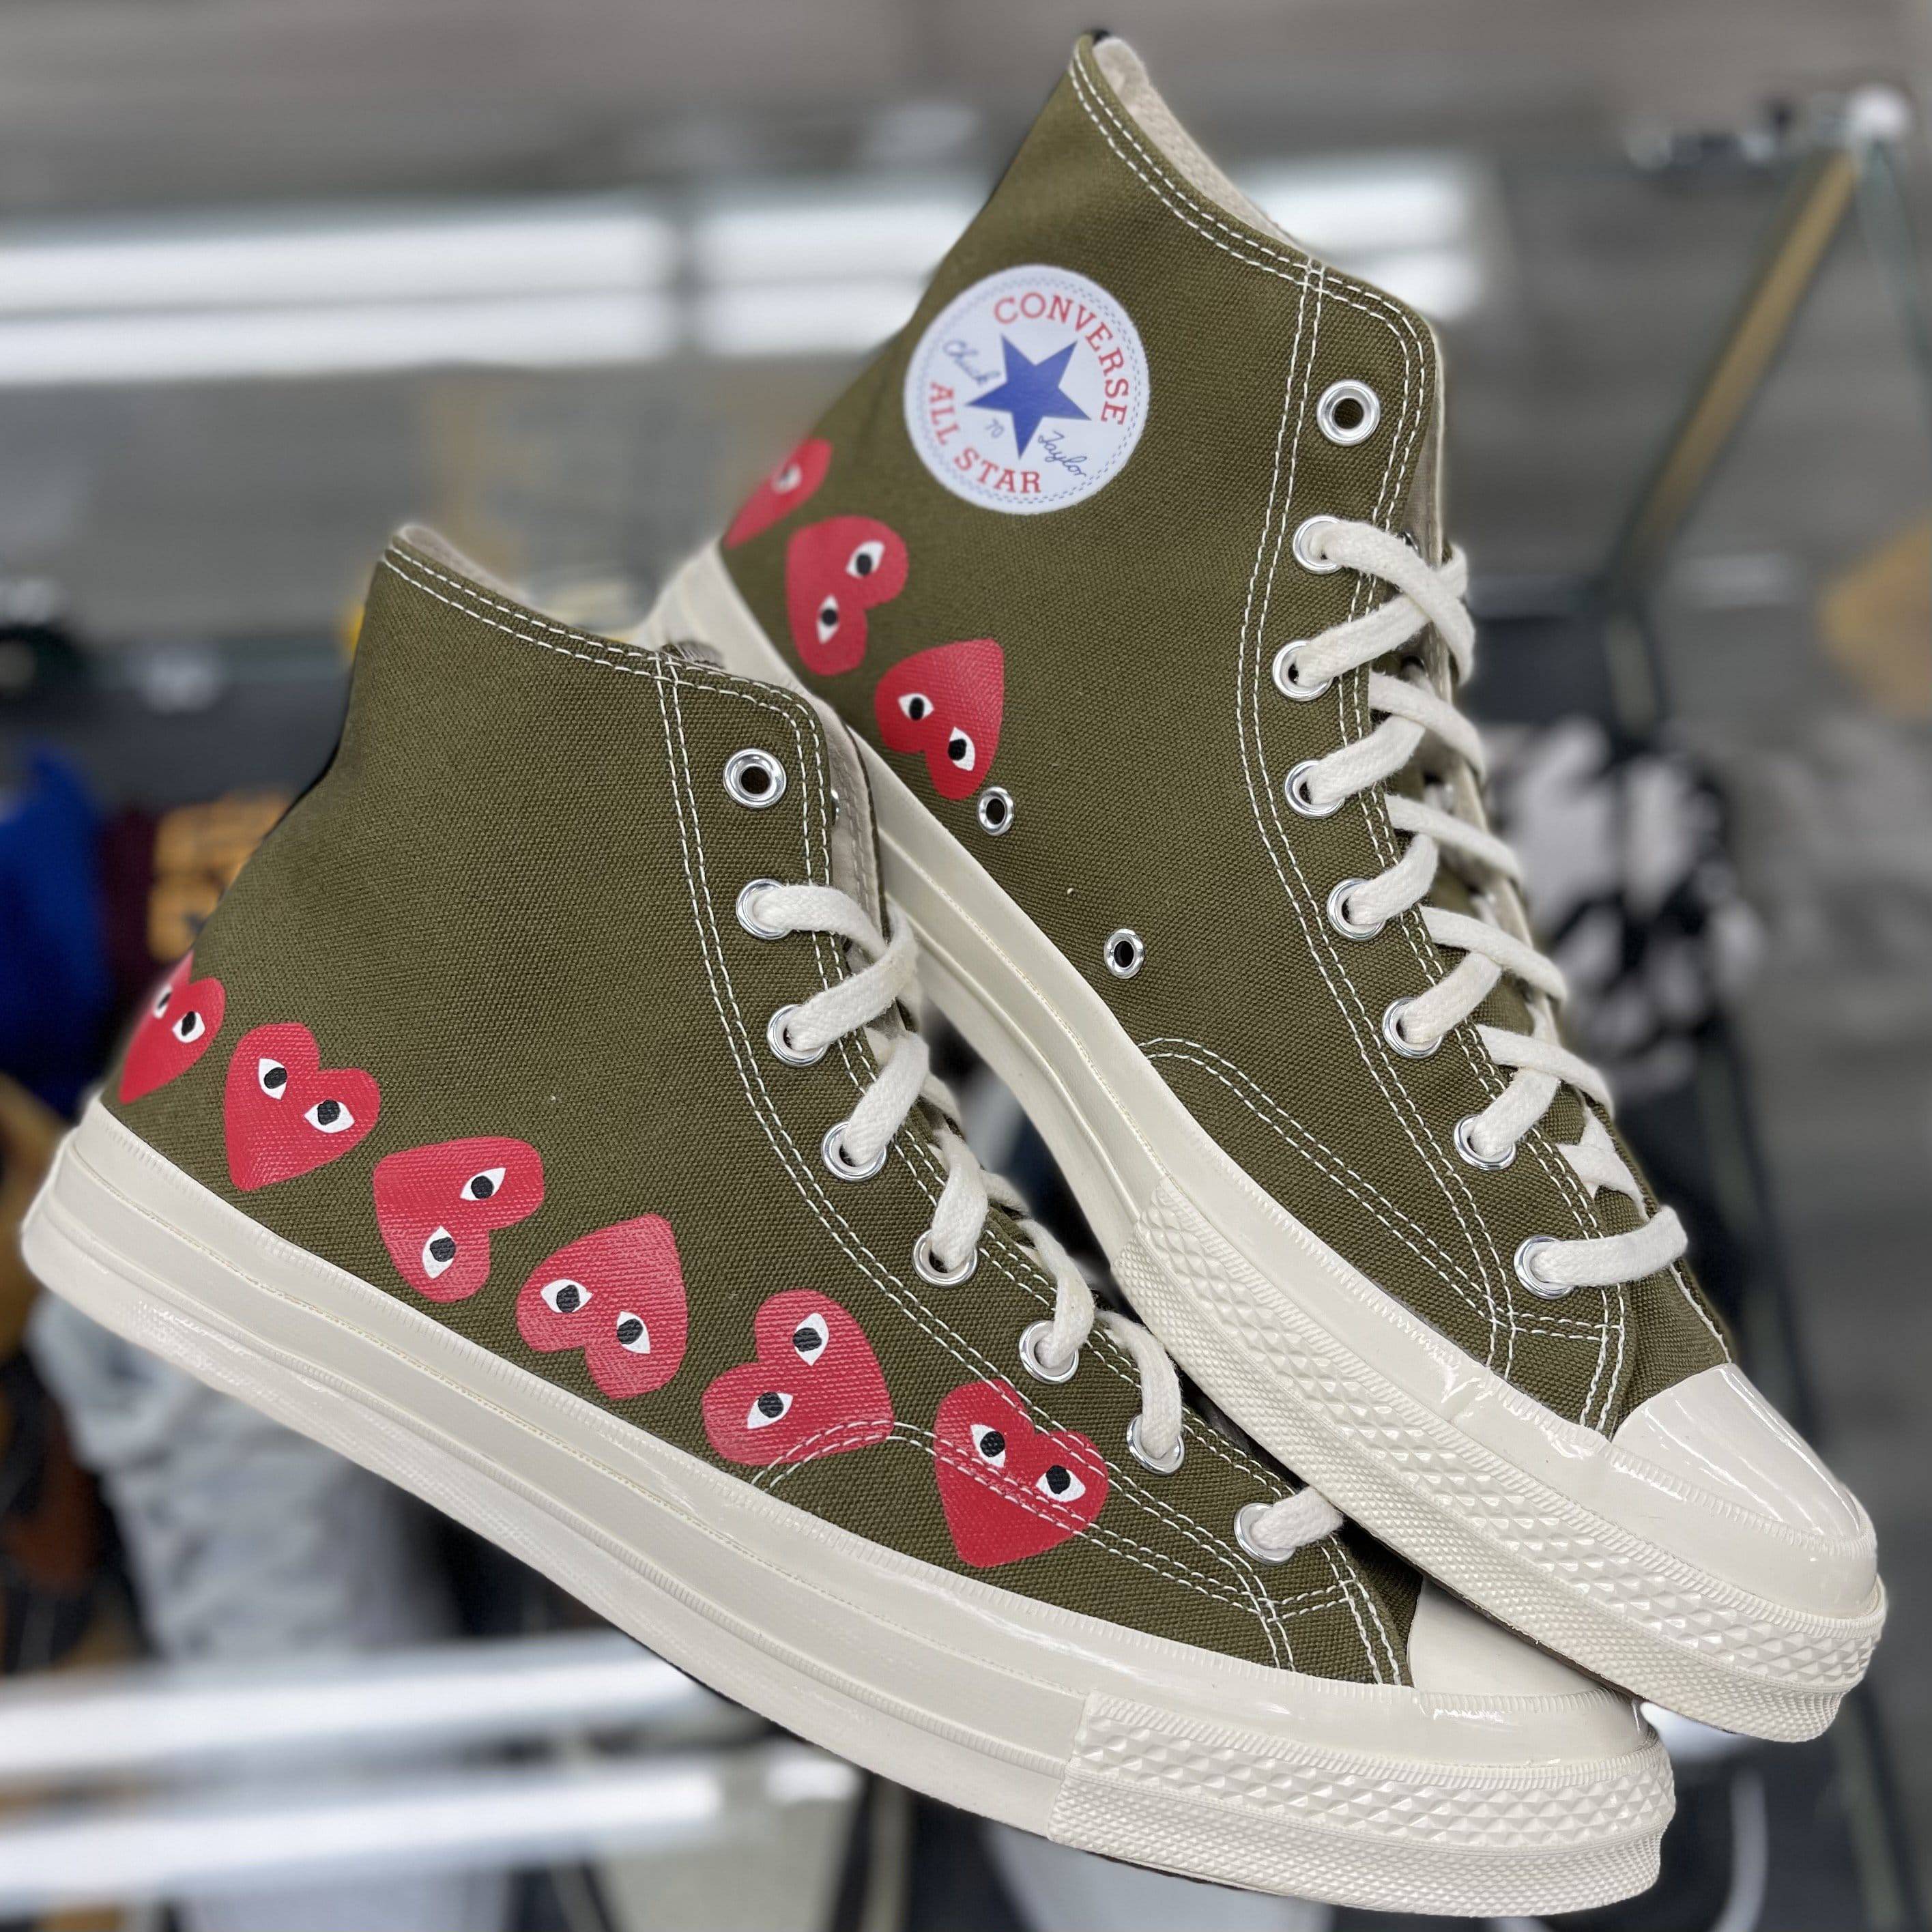 Converse Chuck CDG High “Olive” | Request